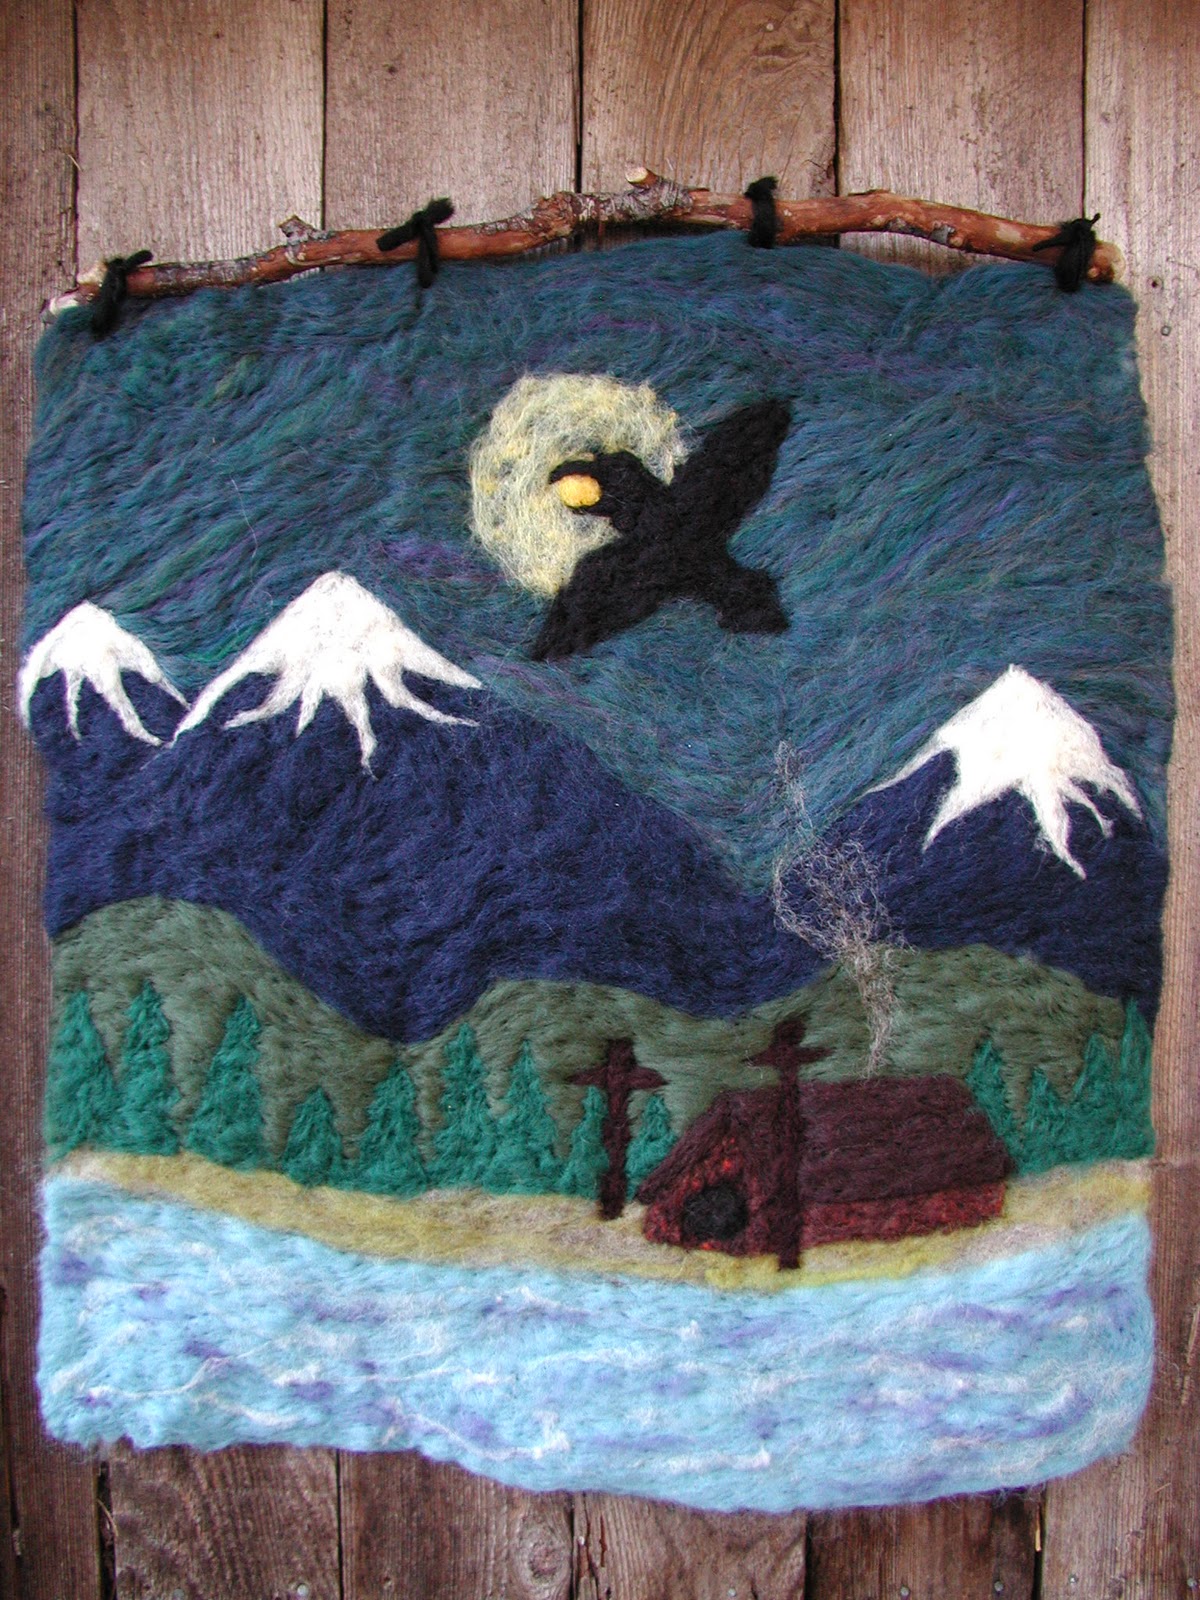 Mountain Hearth Handcrafts: Raven Steals the Light